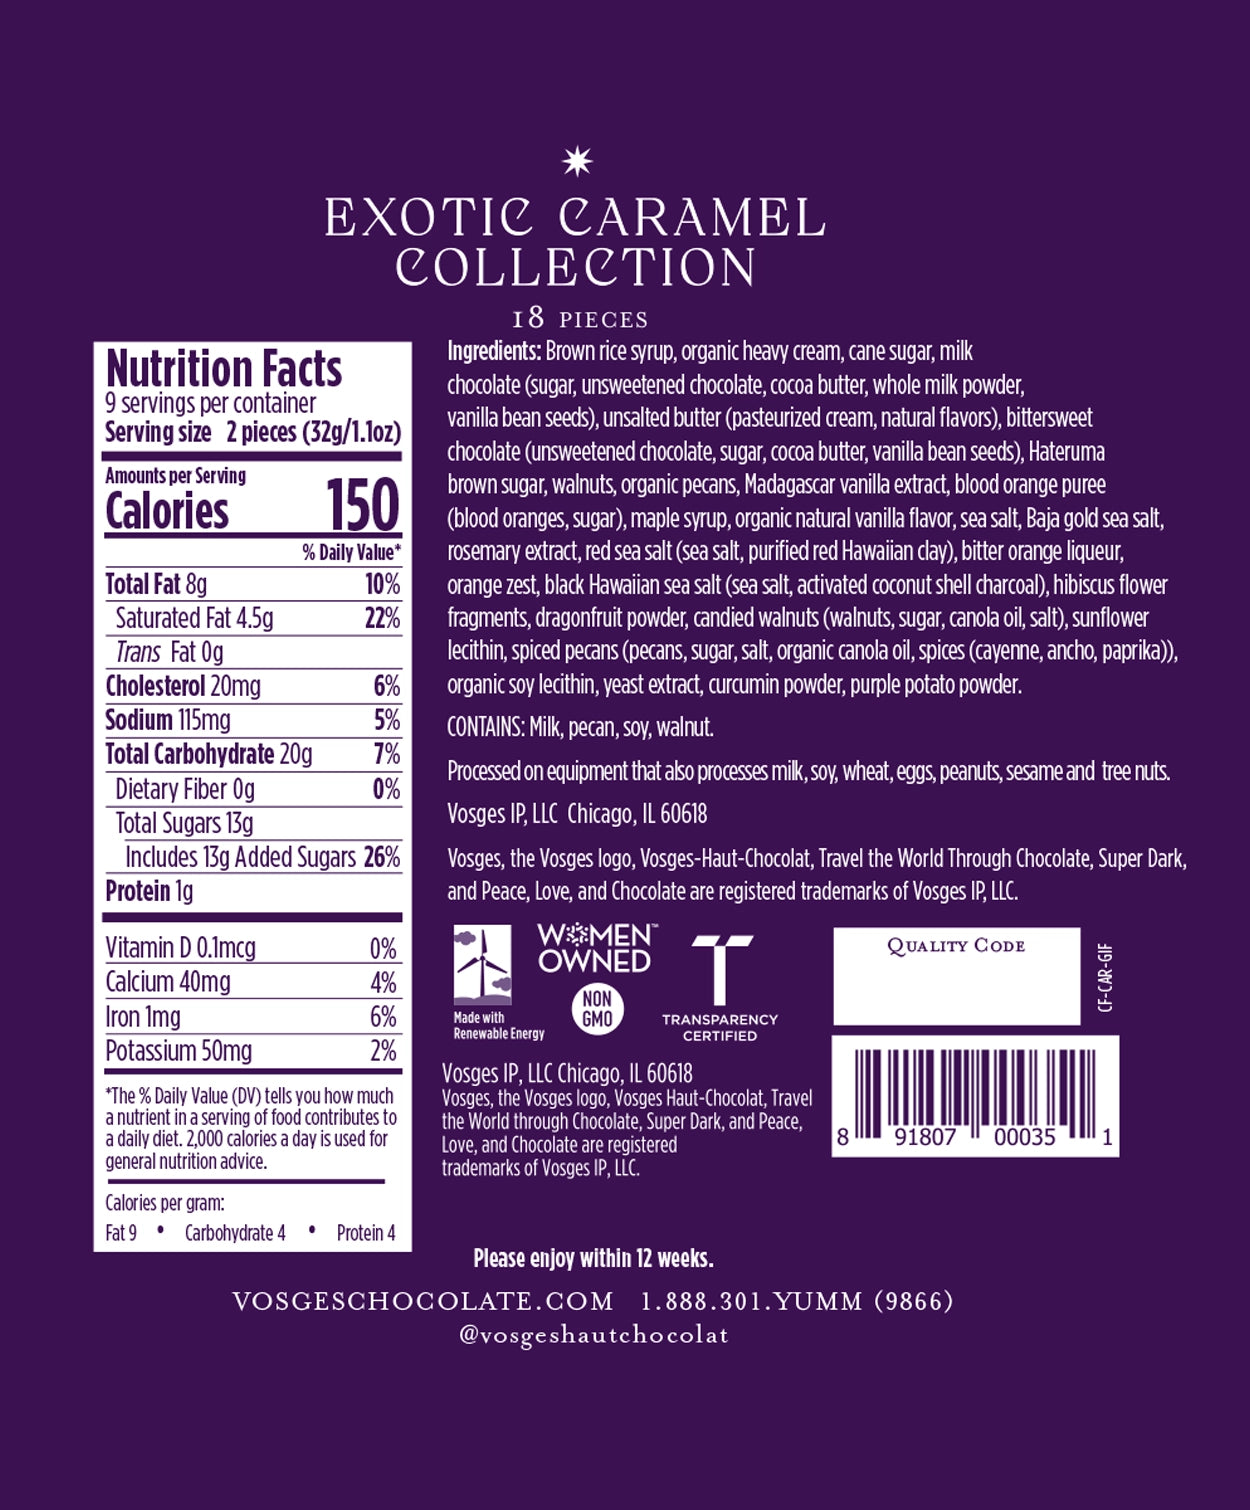 Nutrition Facts and Ingredients of Vosges Haut-Chocolat Exotic Caramel Collection in white, san-serif font on a deep purple background.